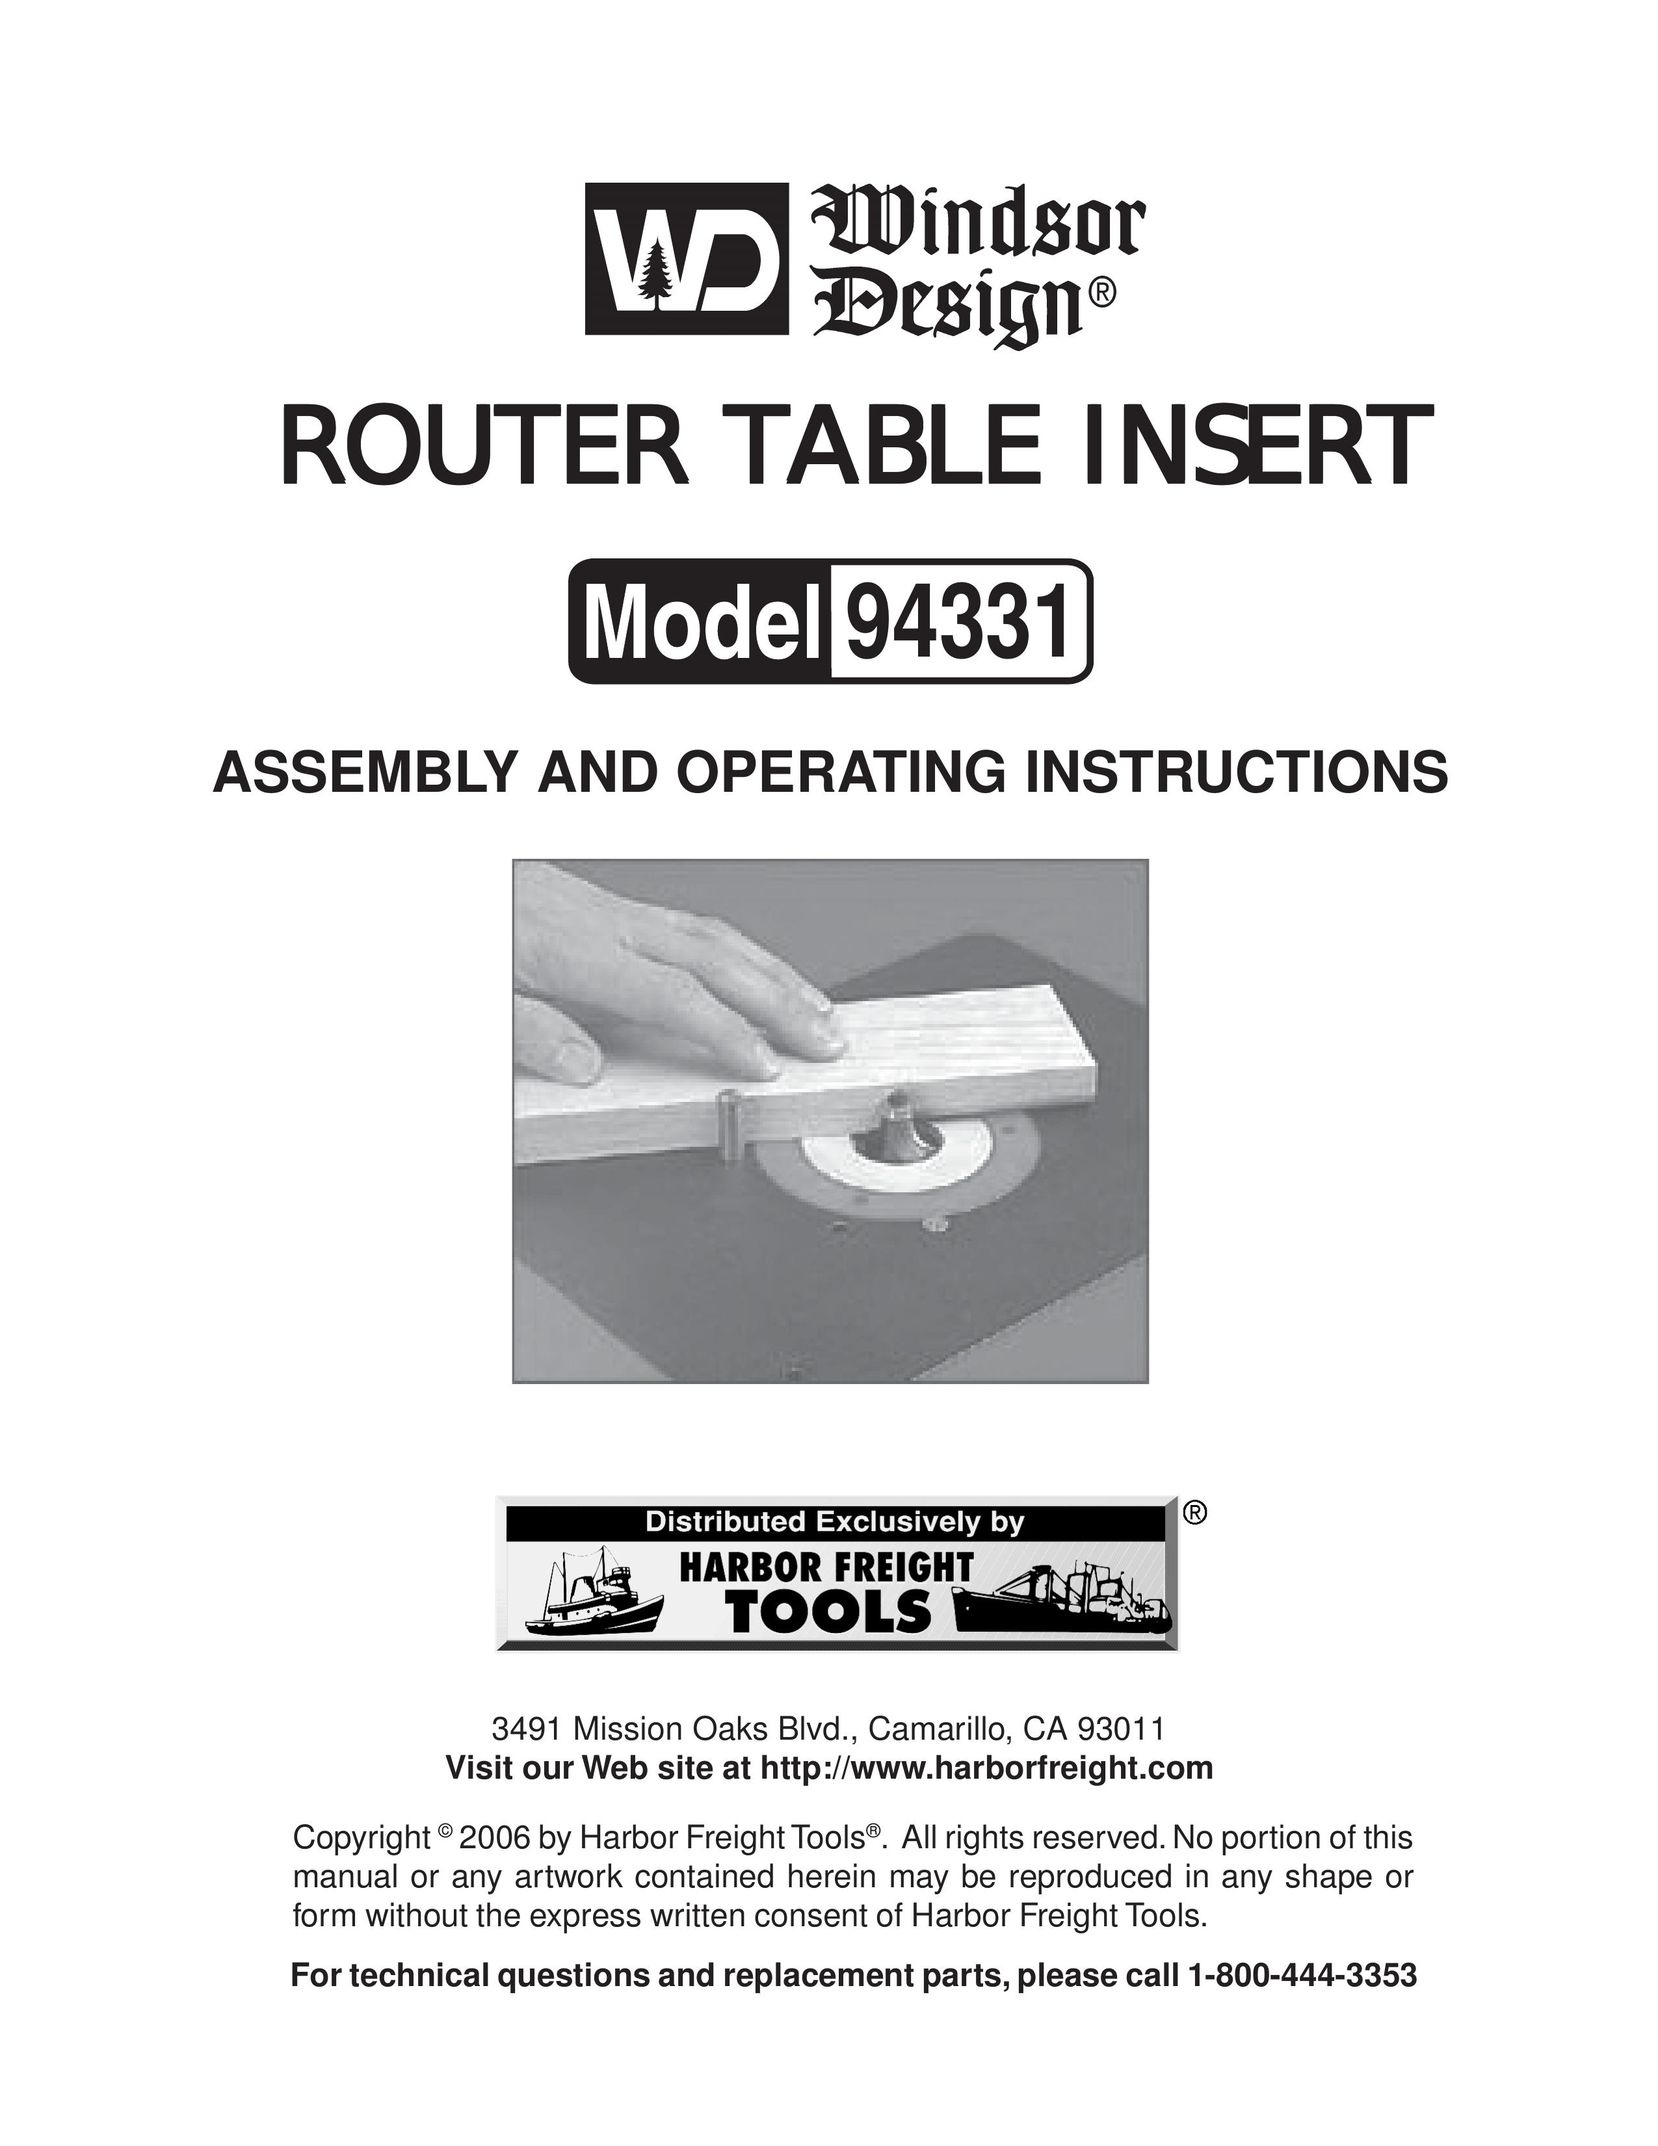 Harbor Freight Tools 94331 Router User Manual